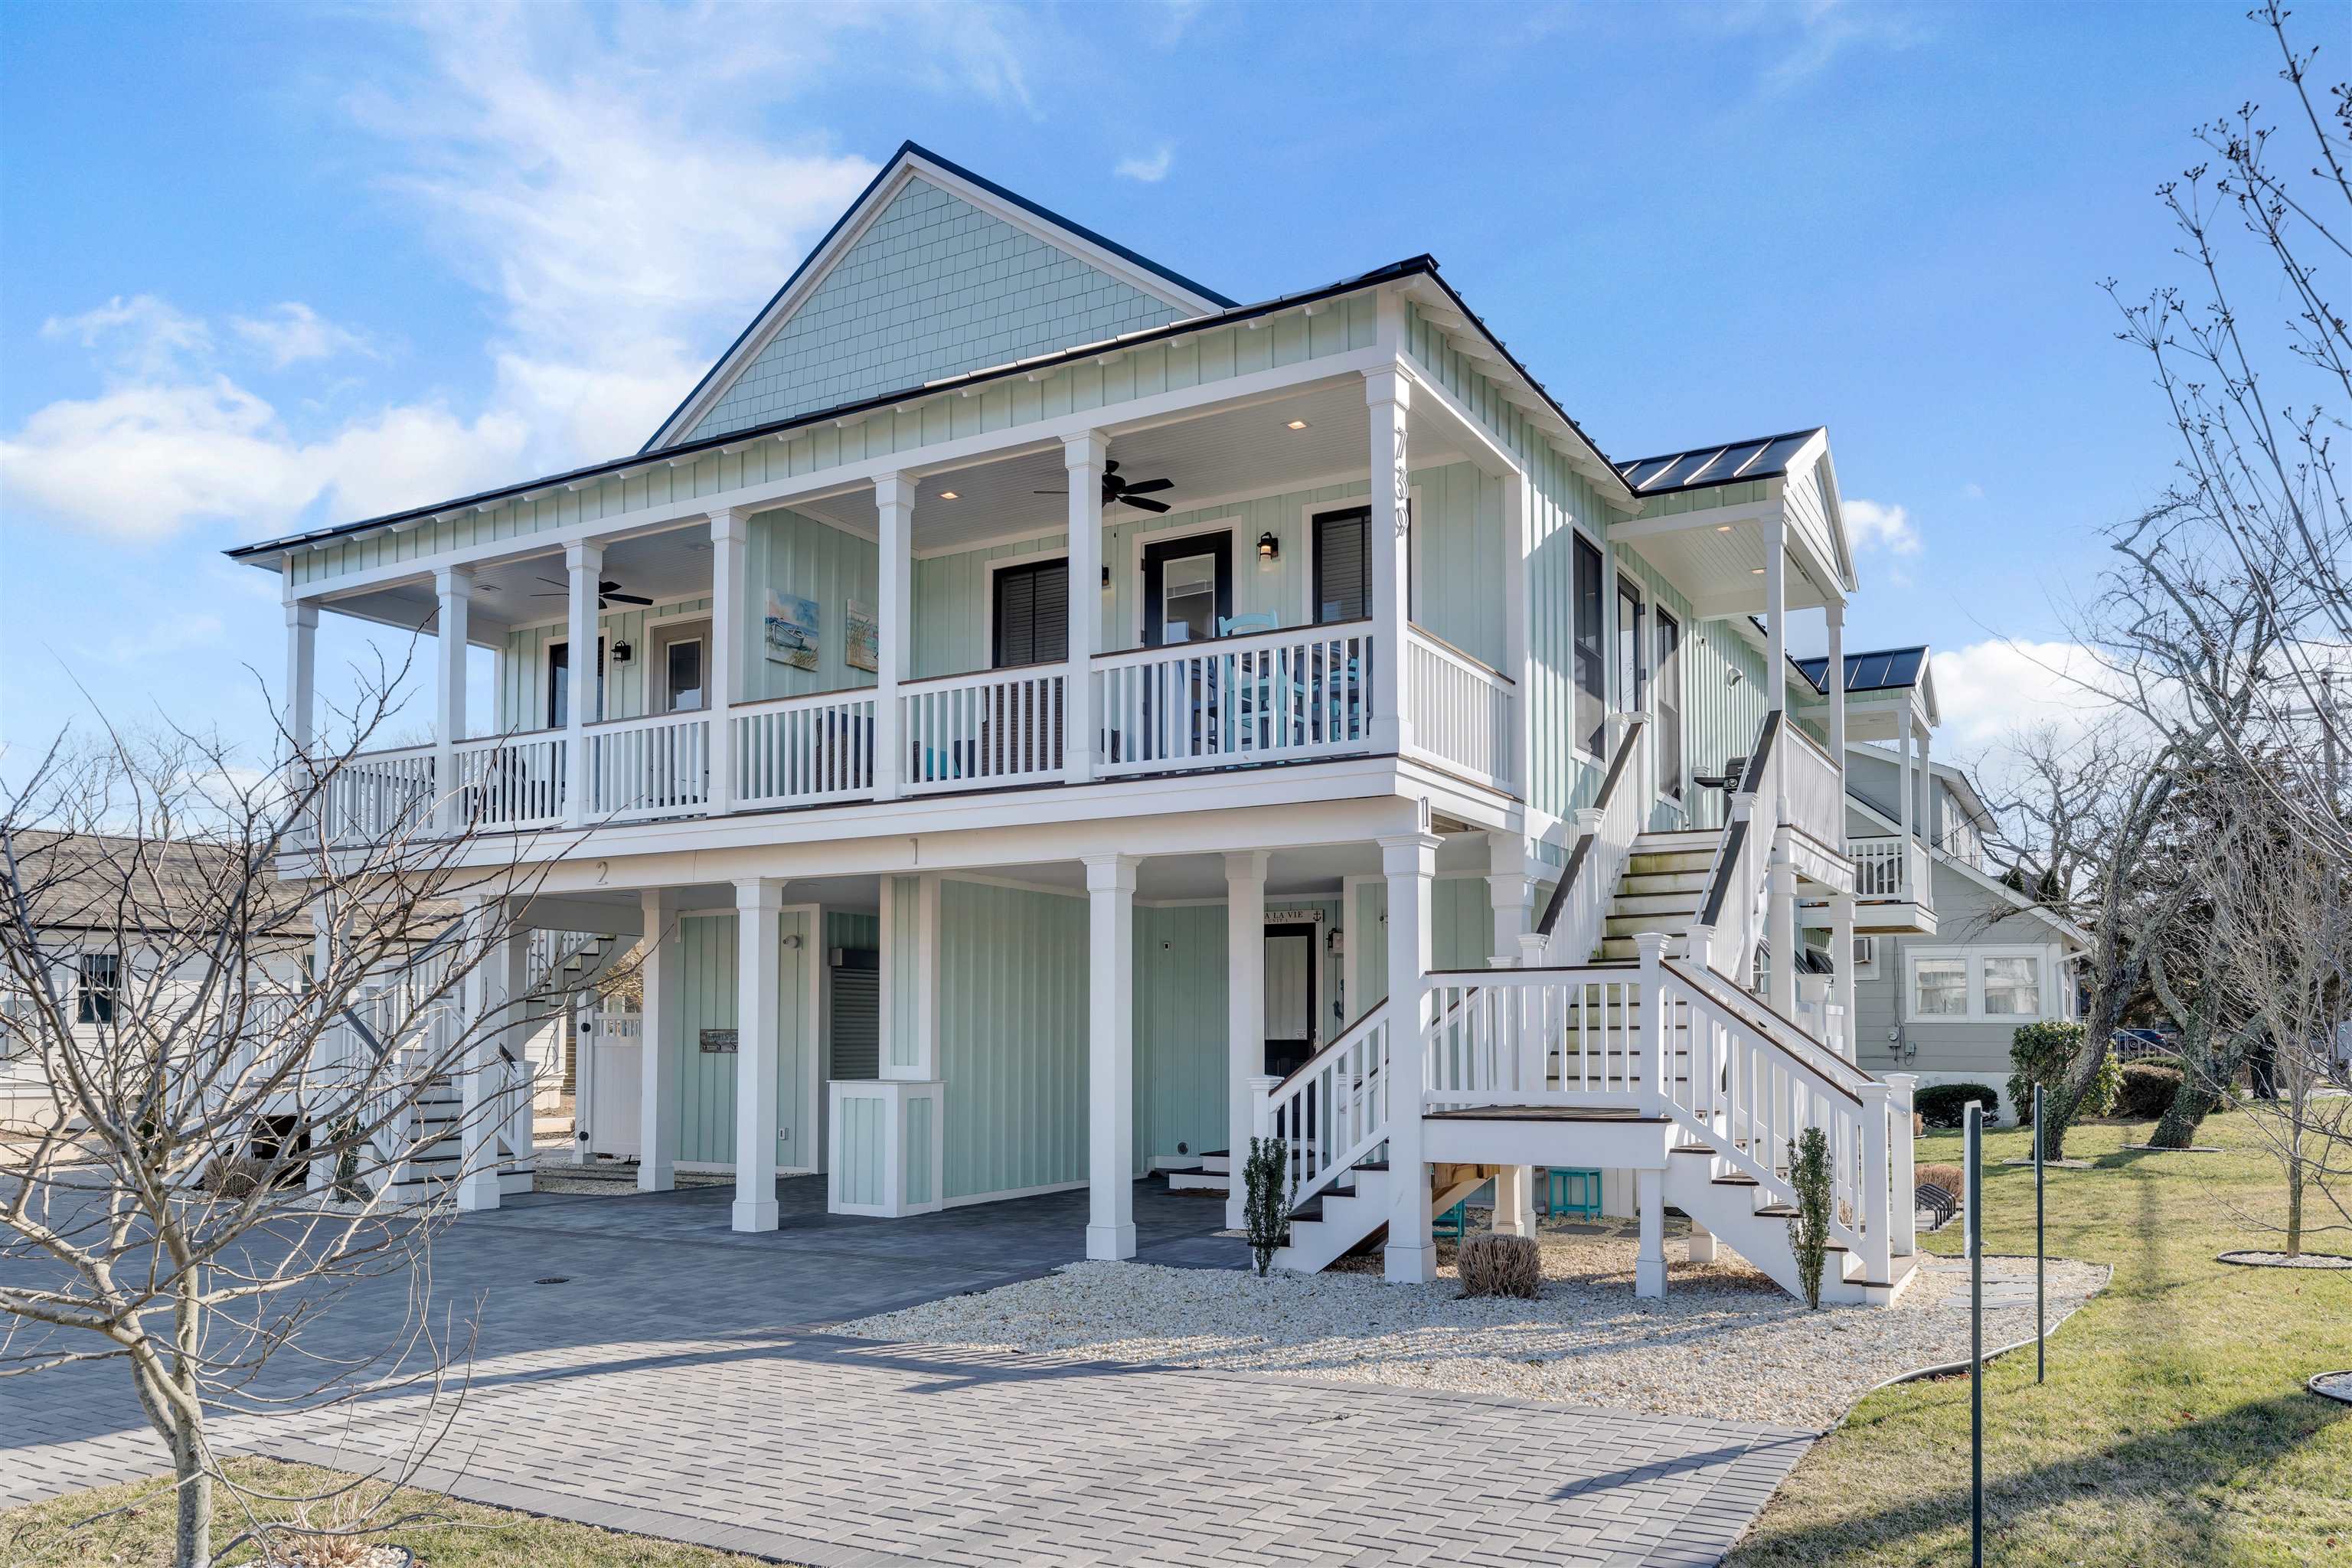 739 Broadway - West Cape May